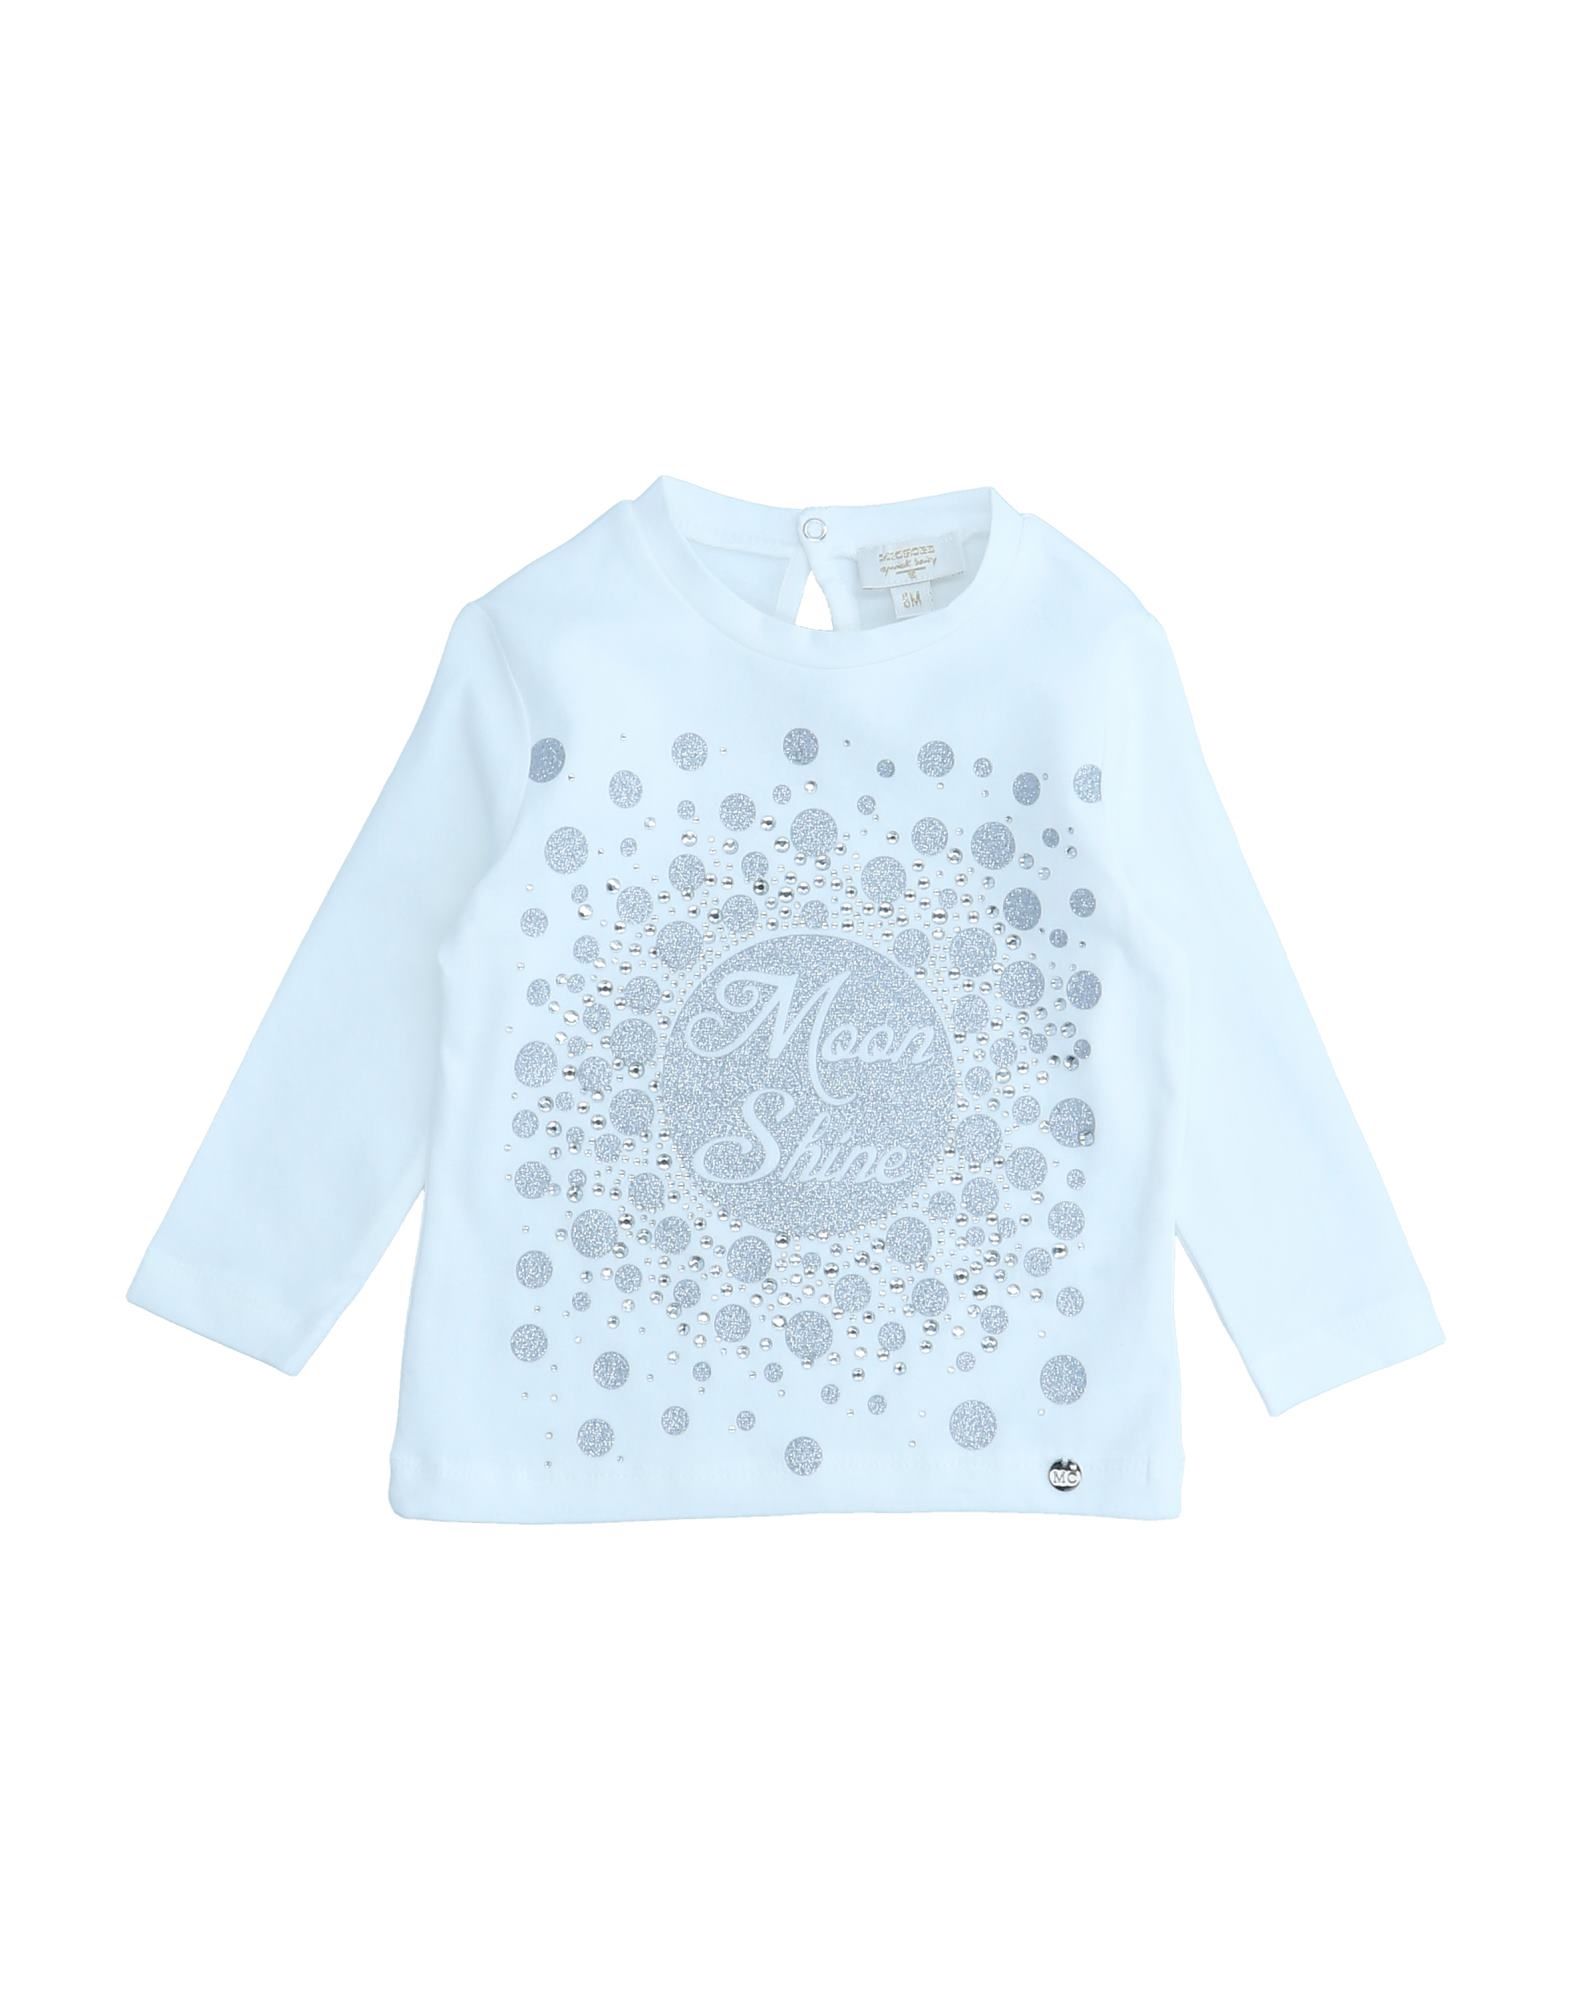 Microbe By Miss Grant Kids' T-shirts In White